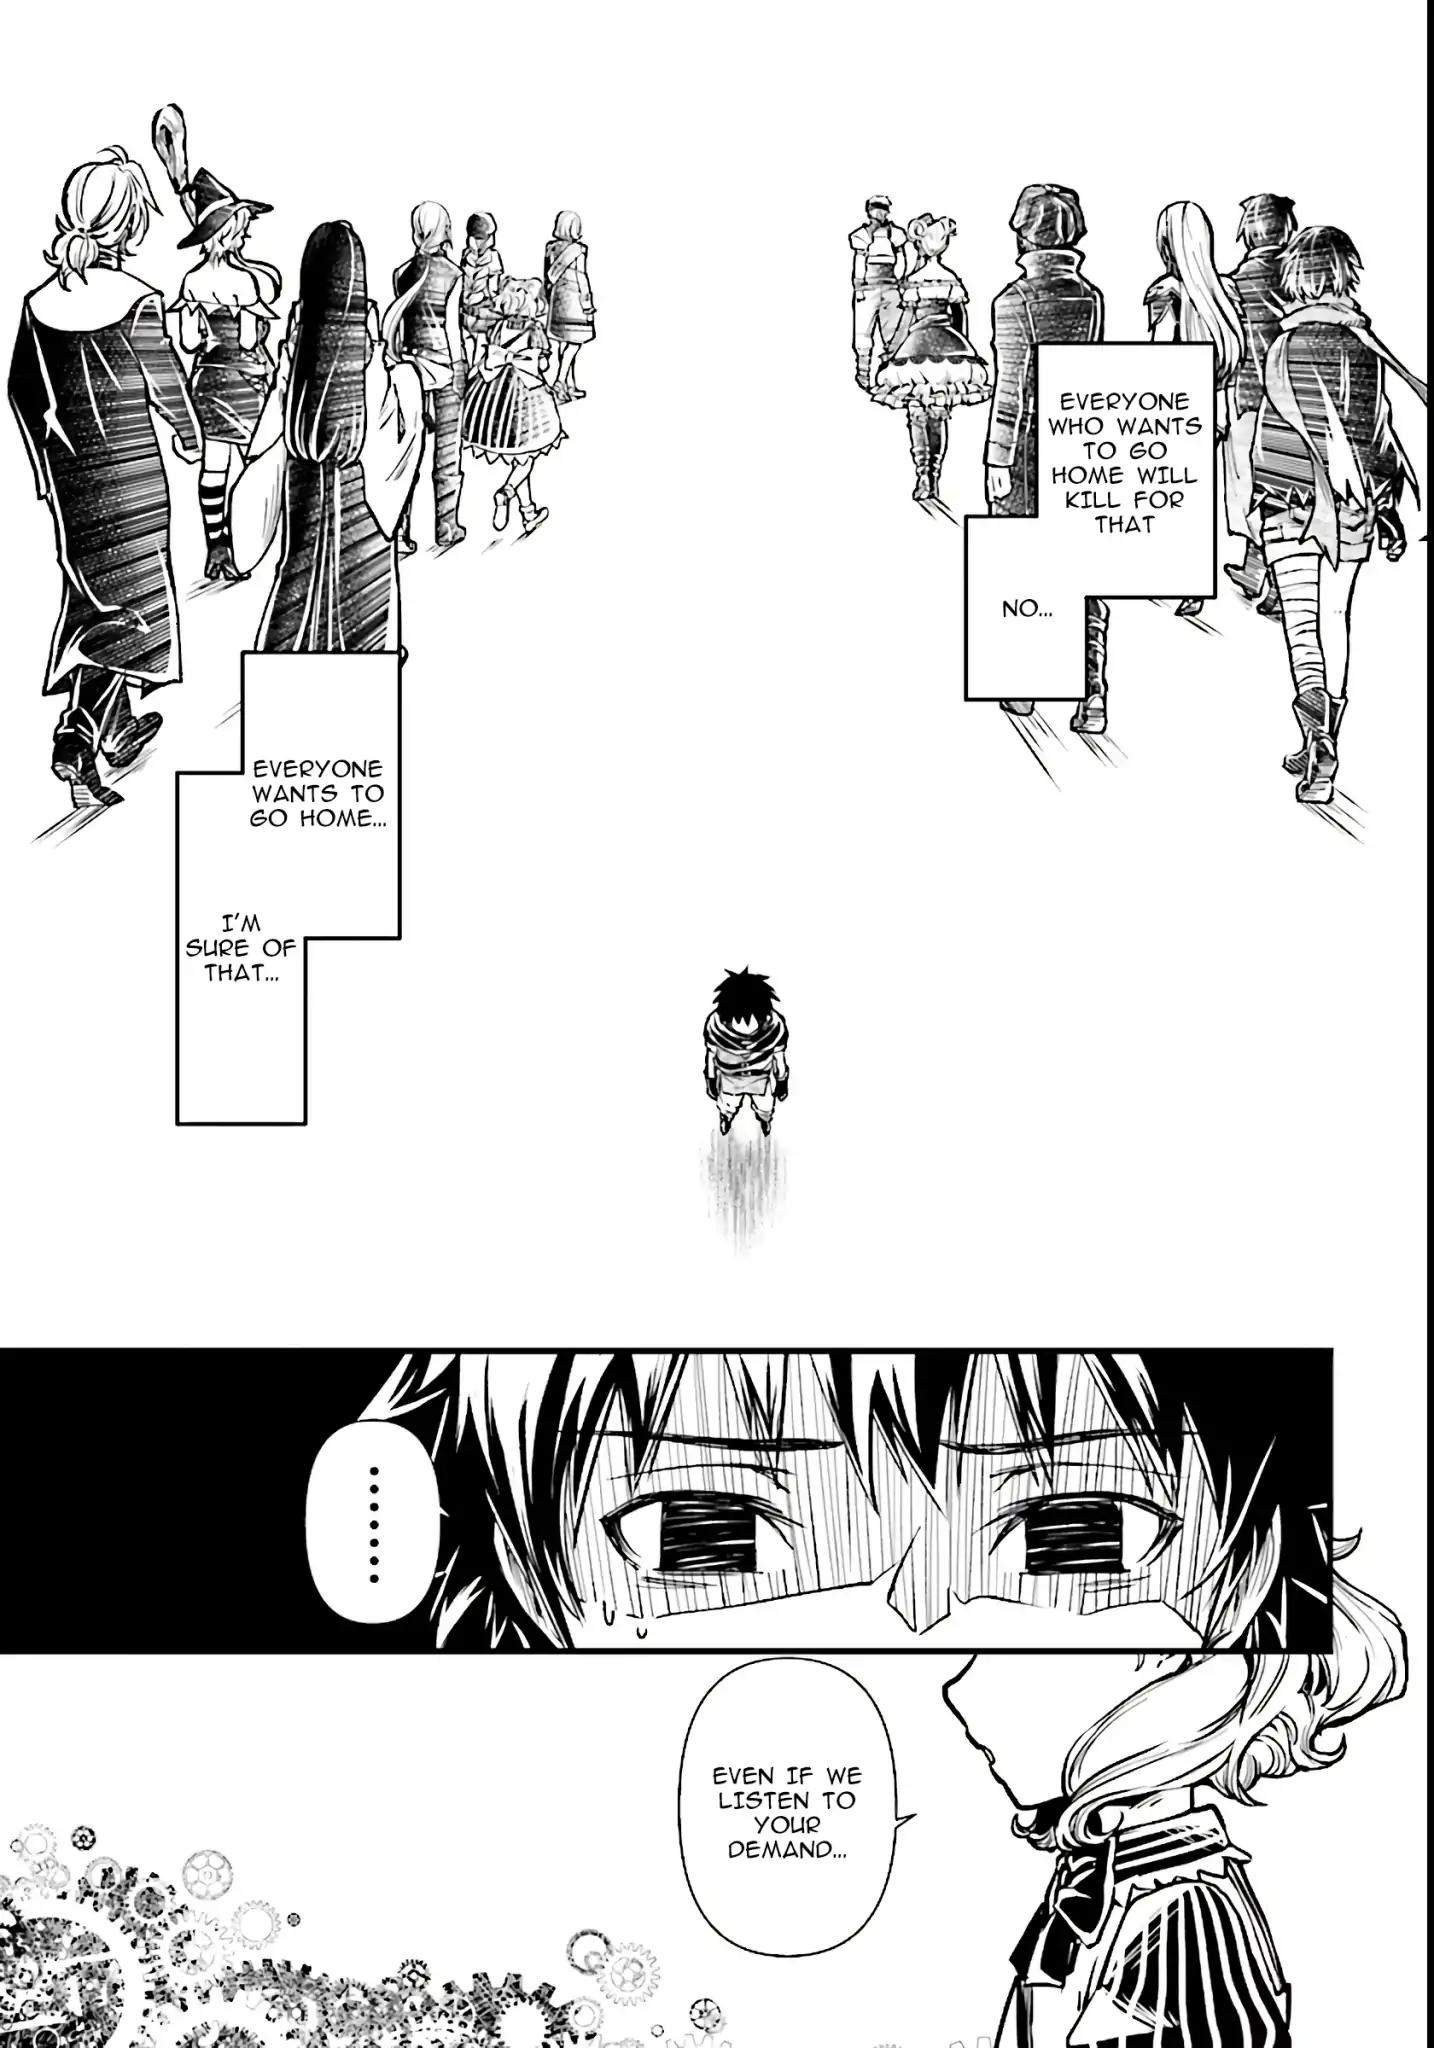 The Deadly Game of Hero From Another World Vol.1 Chapter 2: